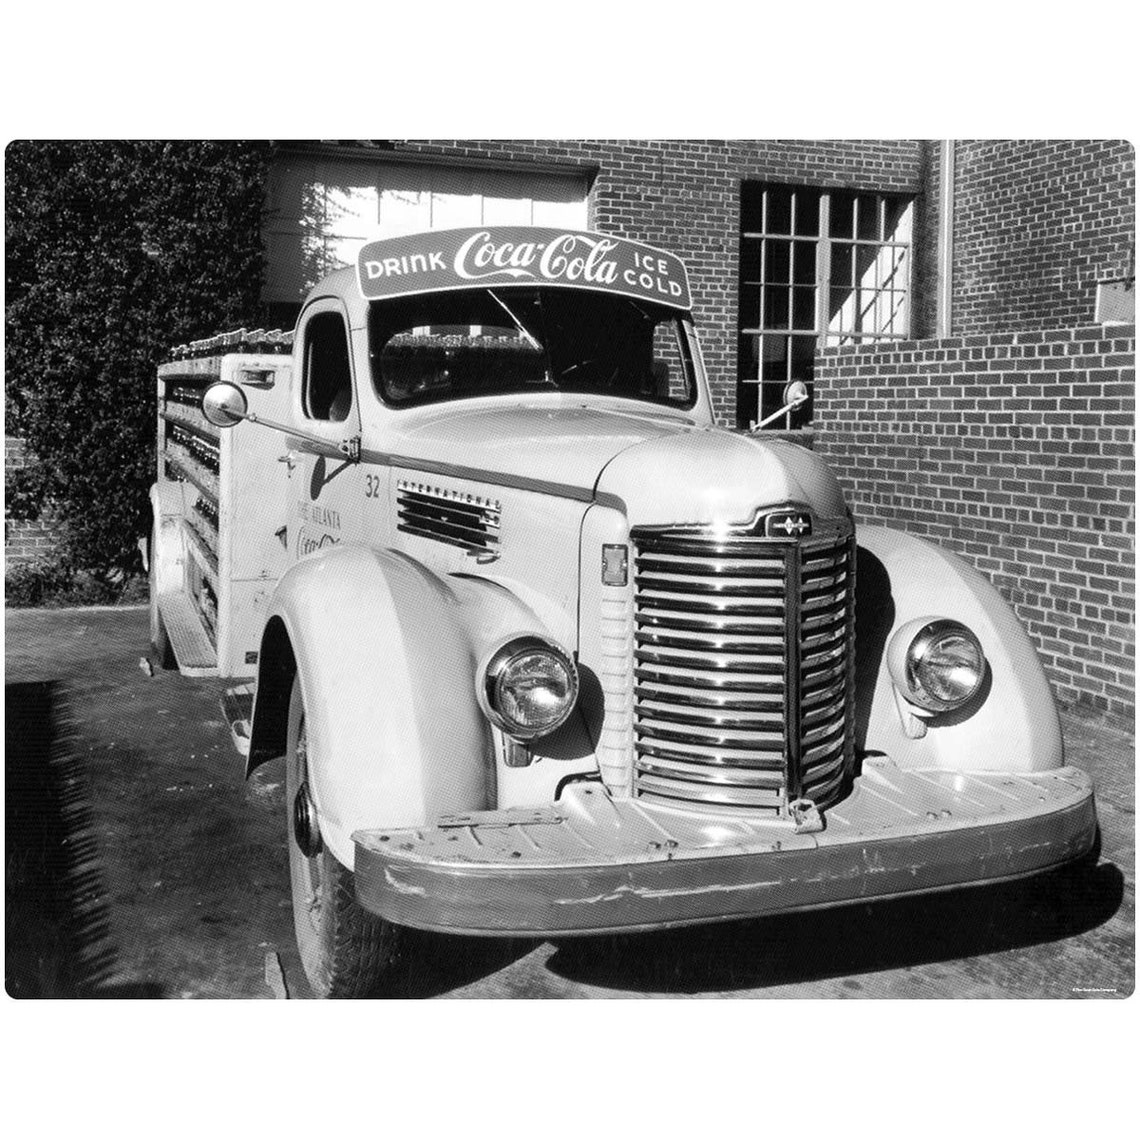 Coca-Cola Delivery Truck 1940s Wall Mural Decal image 0